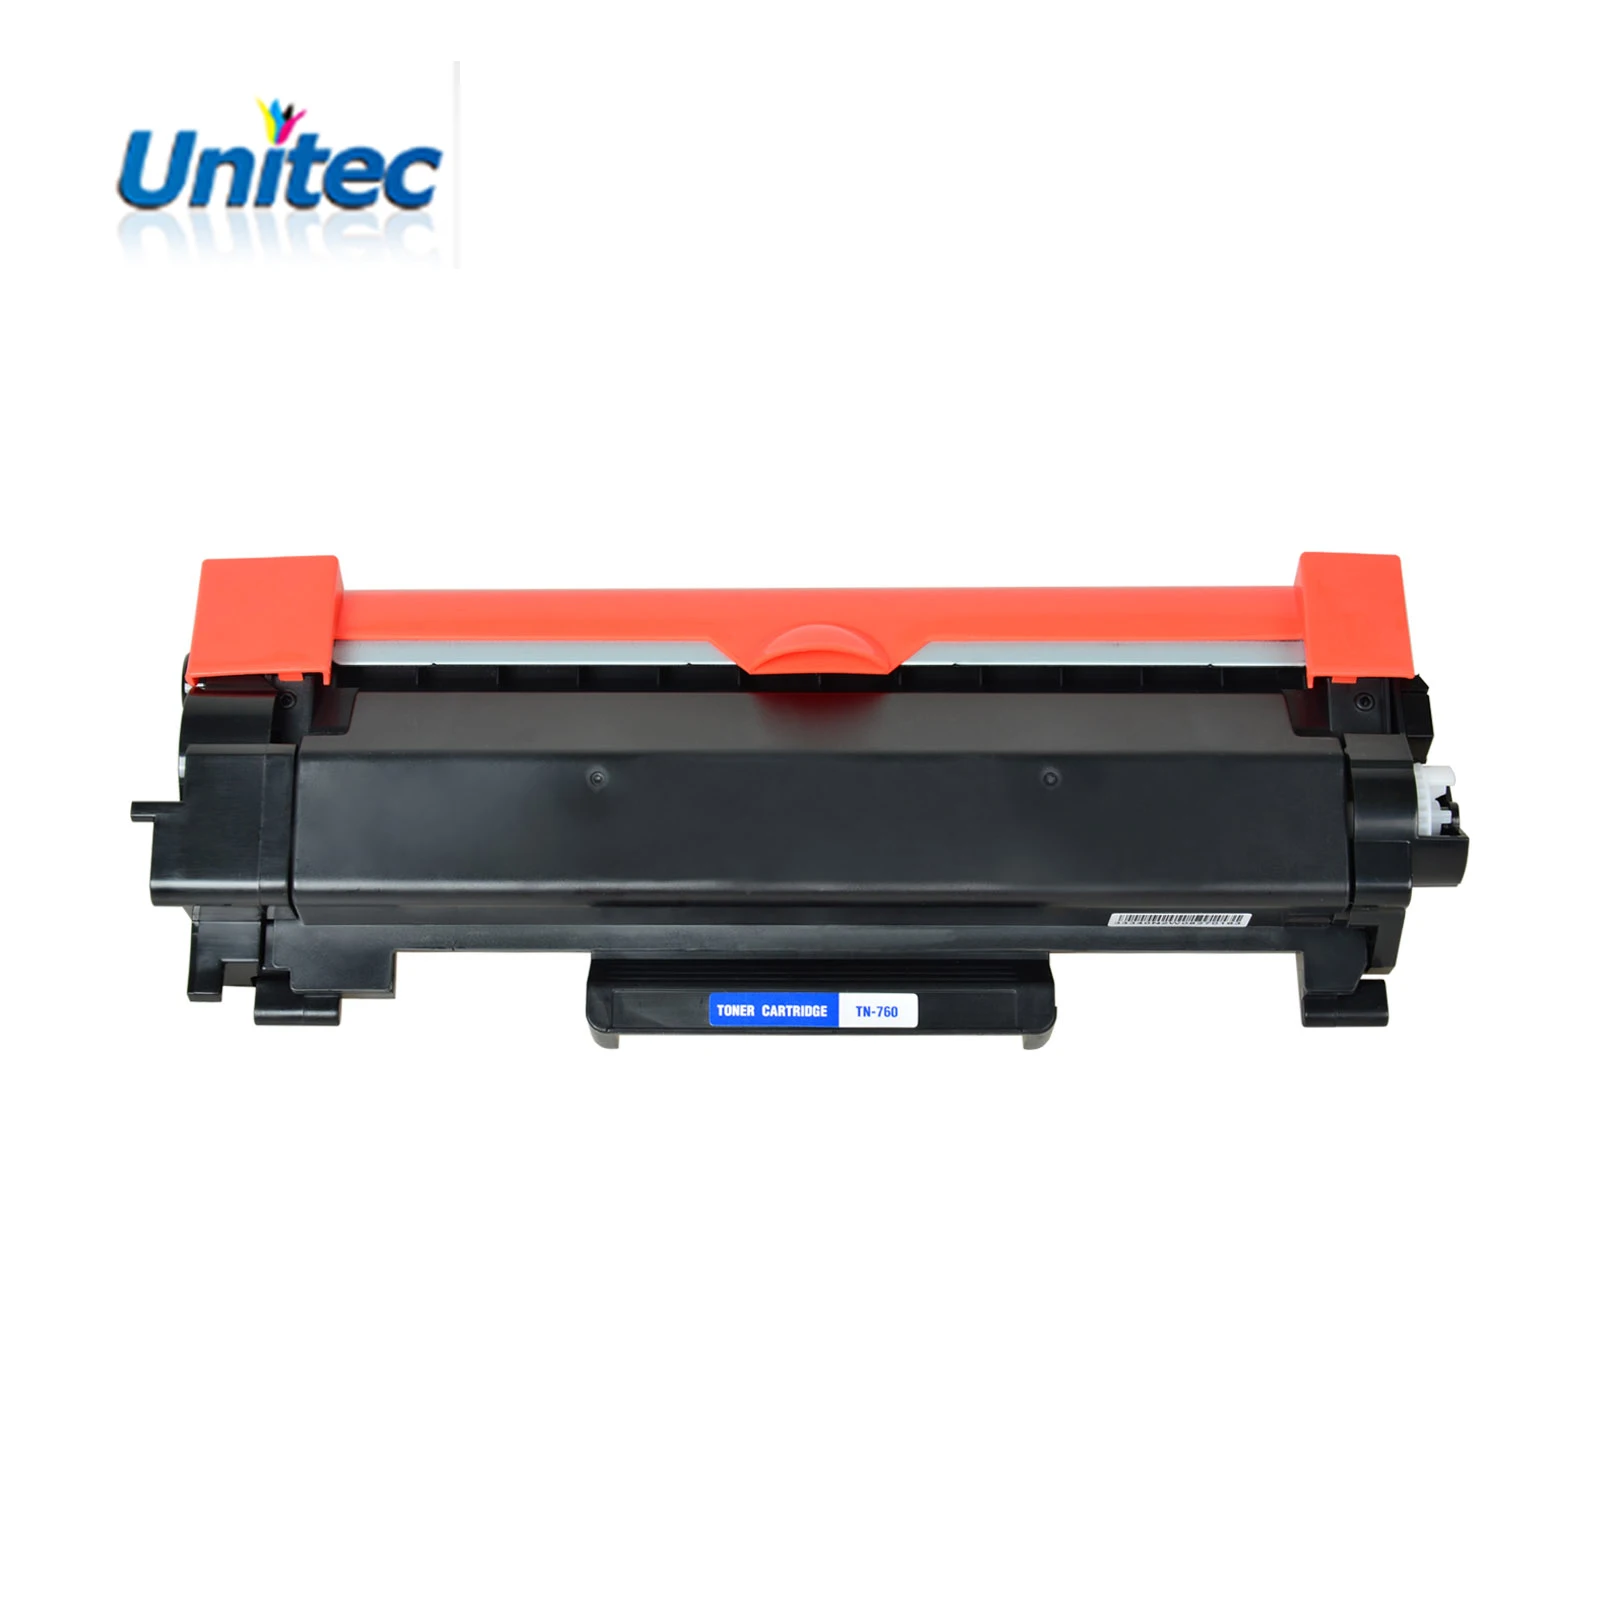 Replacement for Brother TN760 TN 760 TN730 Compatible Toner Cartridge use with Brother l2390dw DCP l2550dw MFC l2710dw (60837066829)